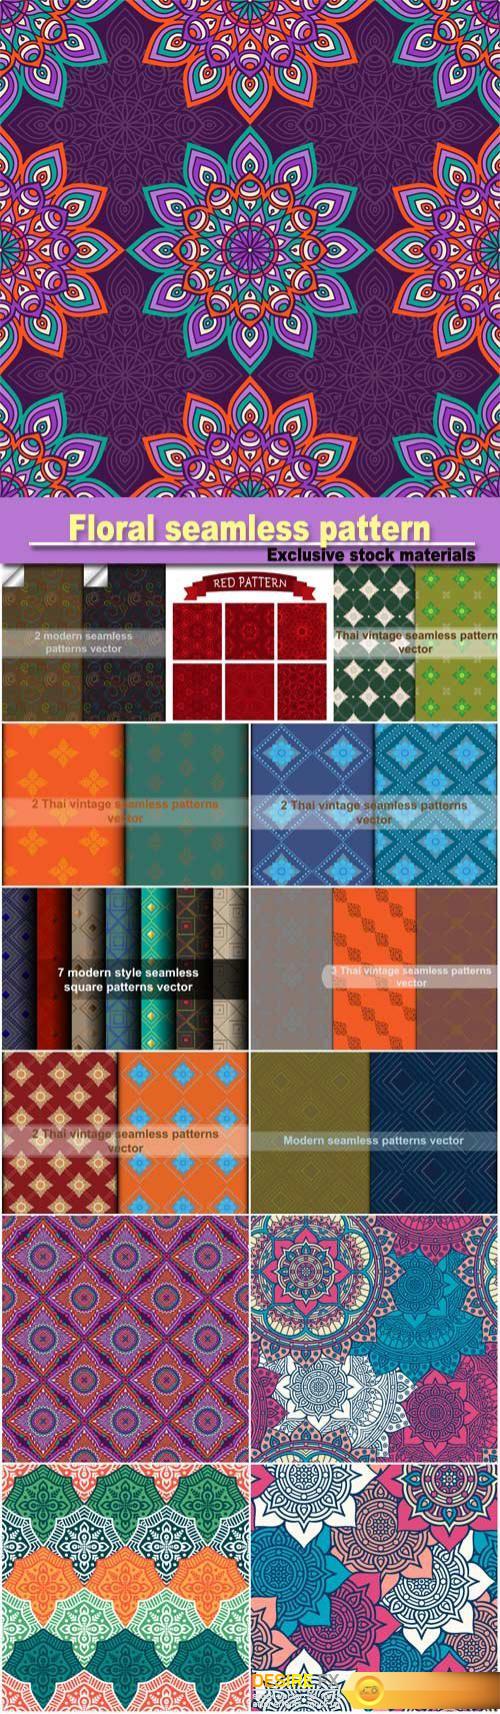 Seamless square patterns, ethnic floral seamless pattern, abstract ornamental pattern vector background